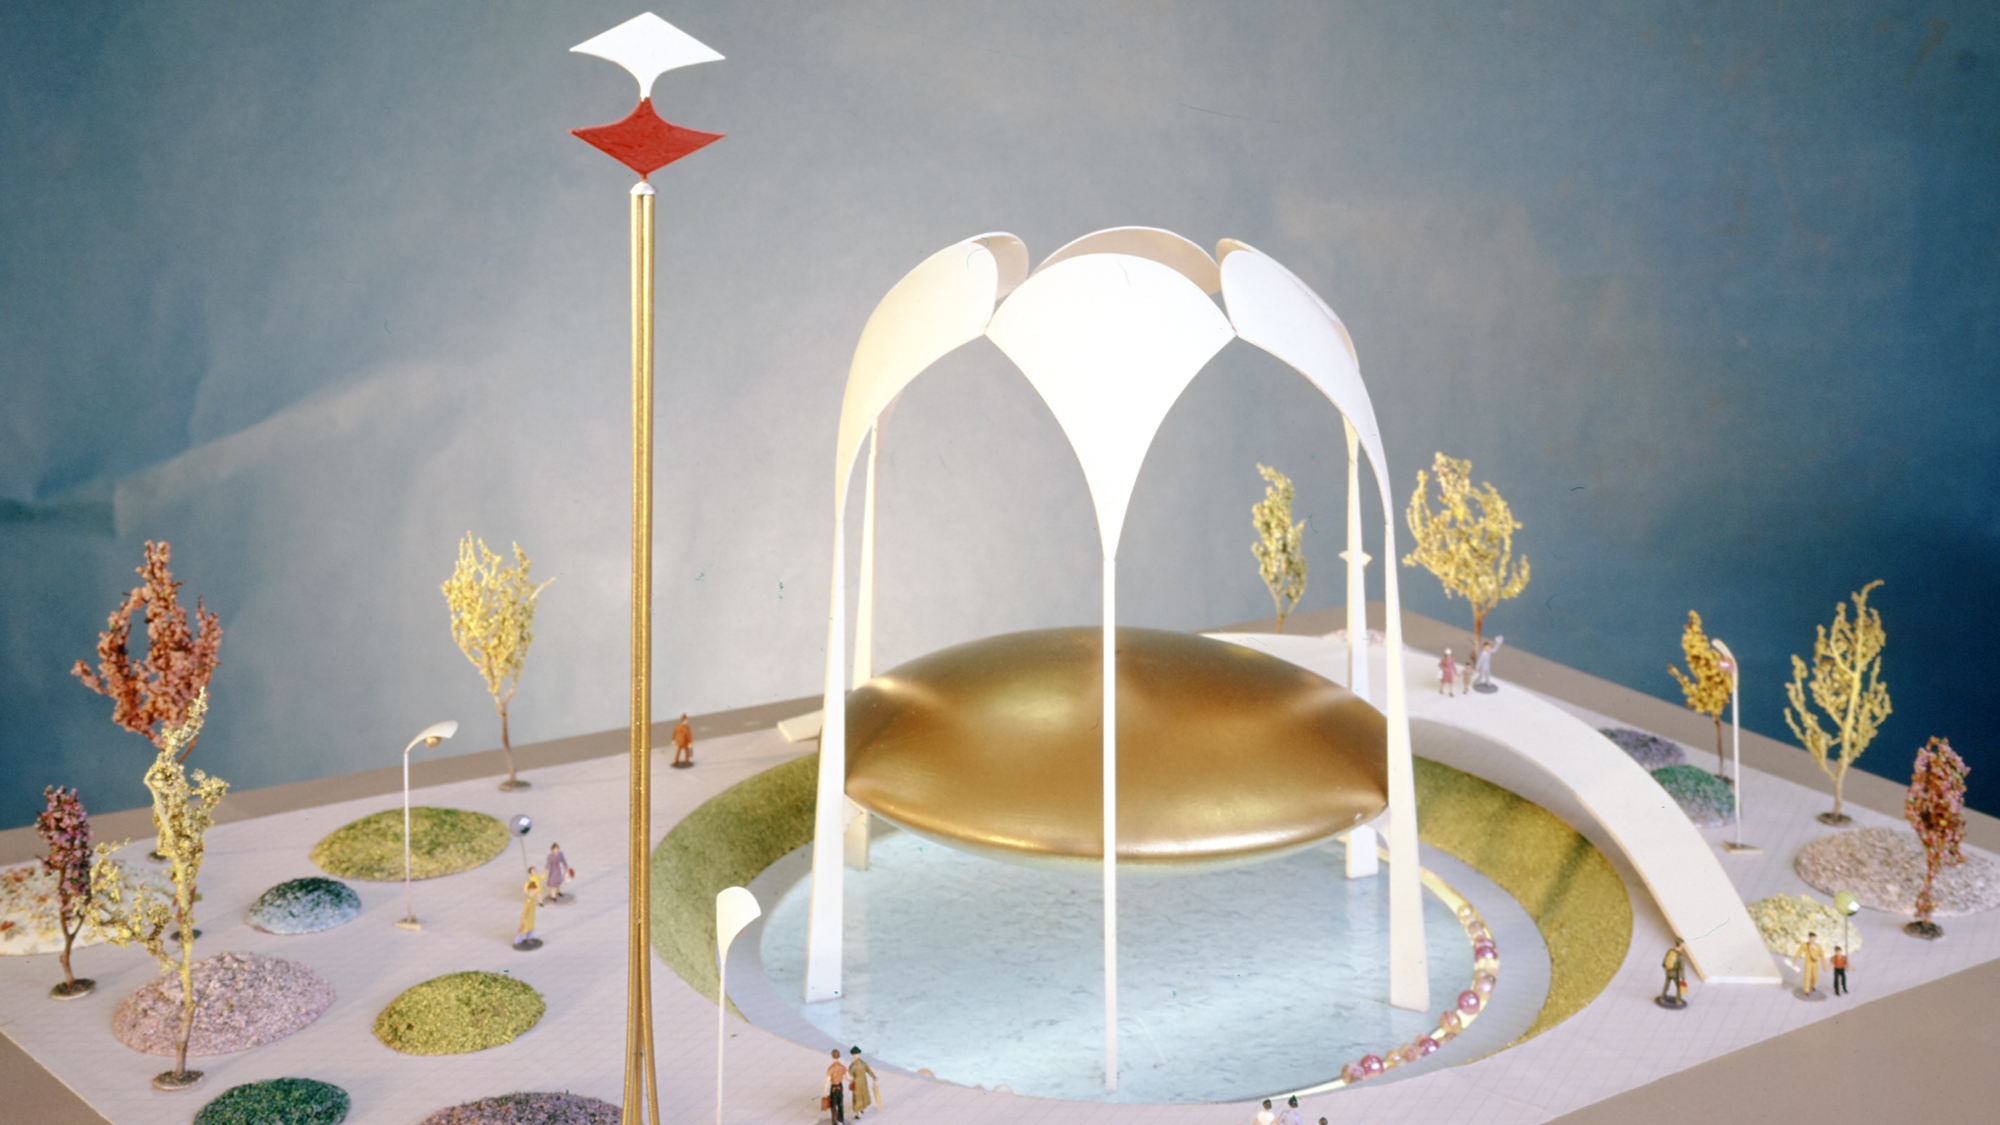 Model of the 1964 Johnson Wax Pavilion at the World’s Fair